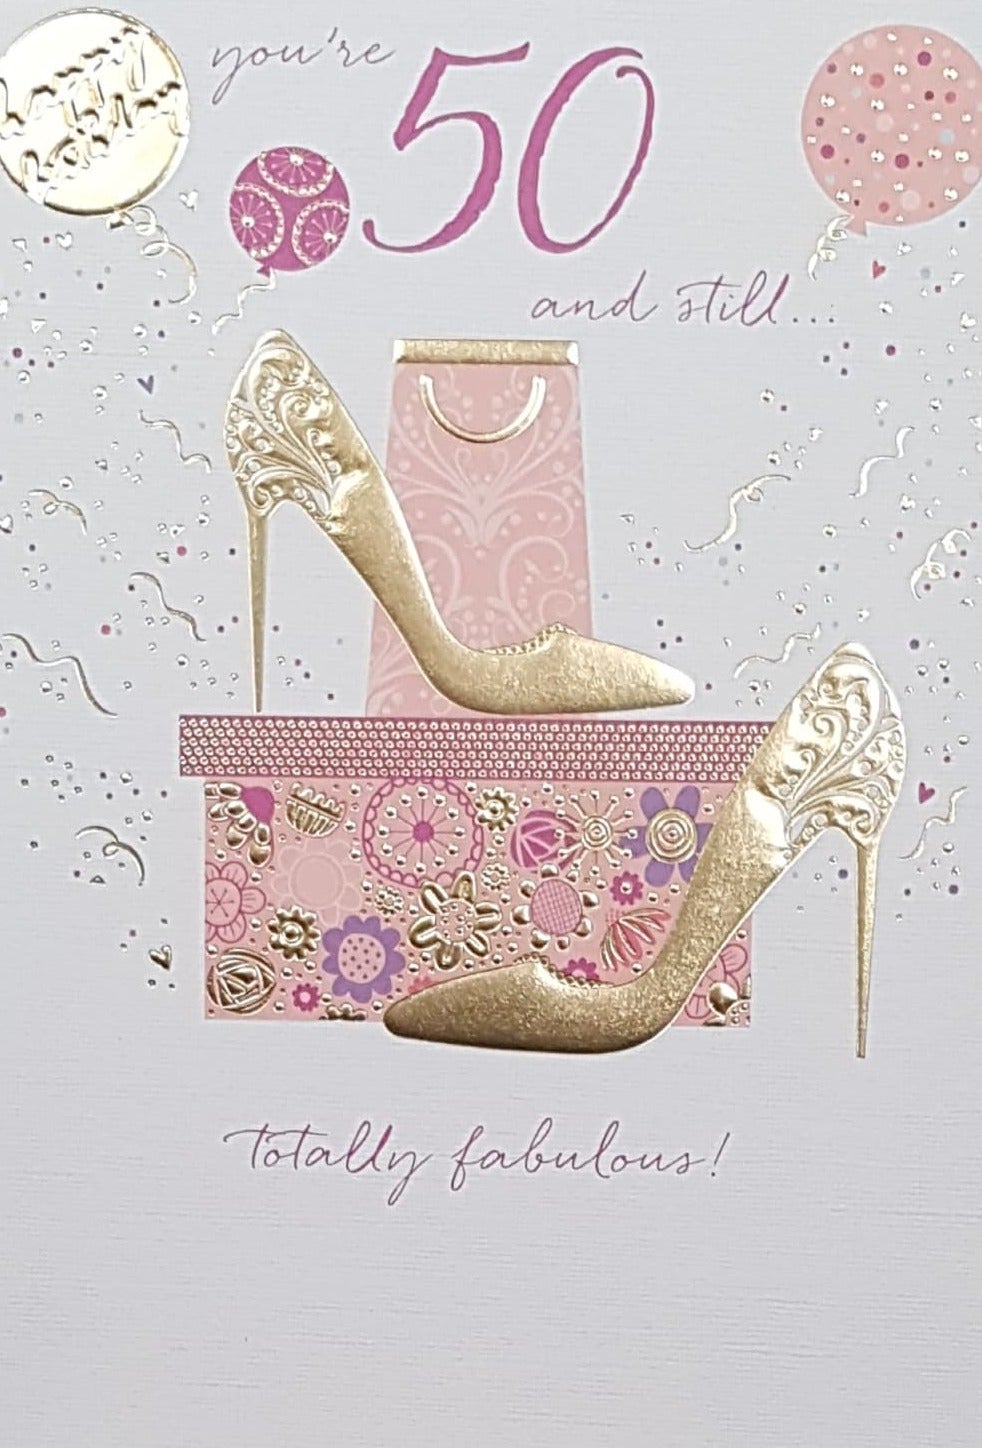 Age 50 Birthday Card - Gold High Heels On Display On A Pink Sparkly Box